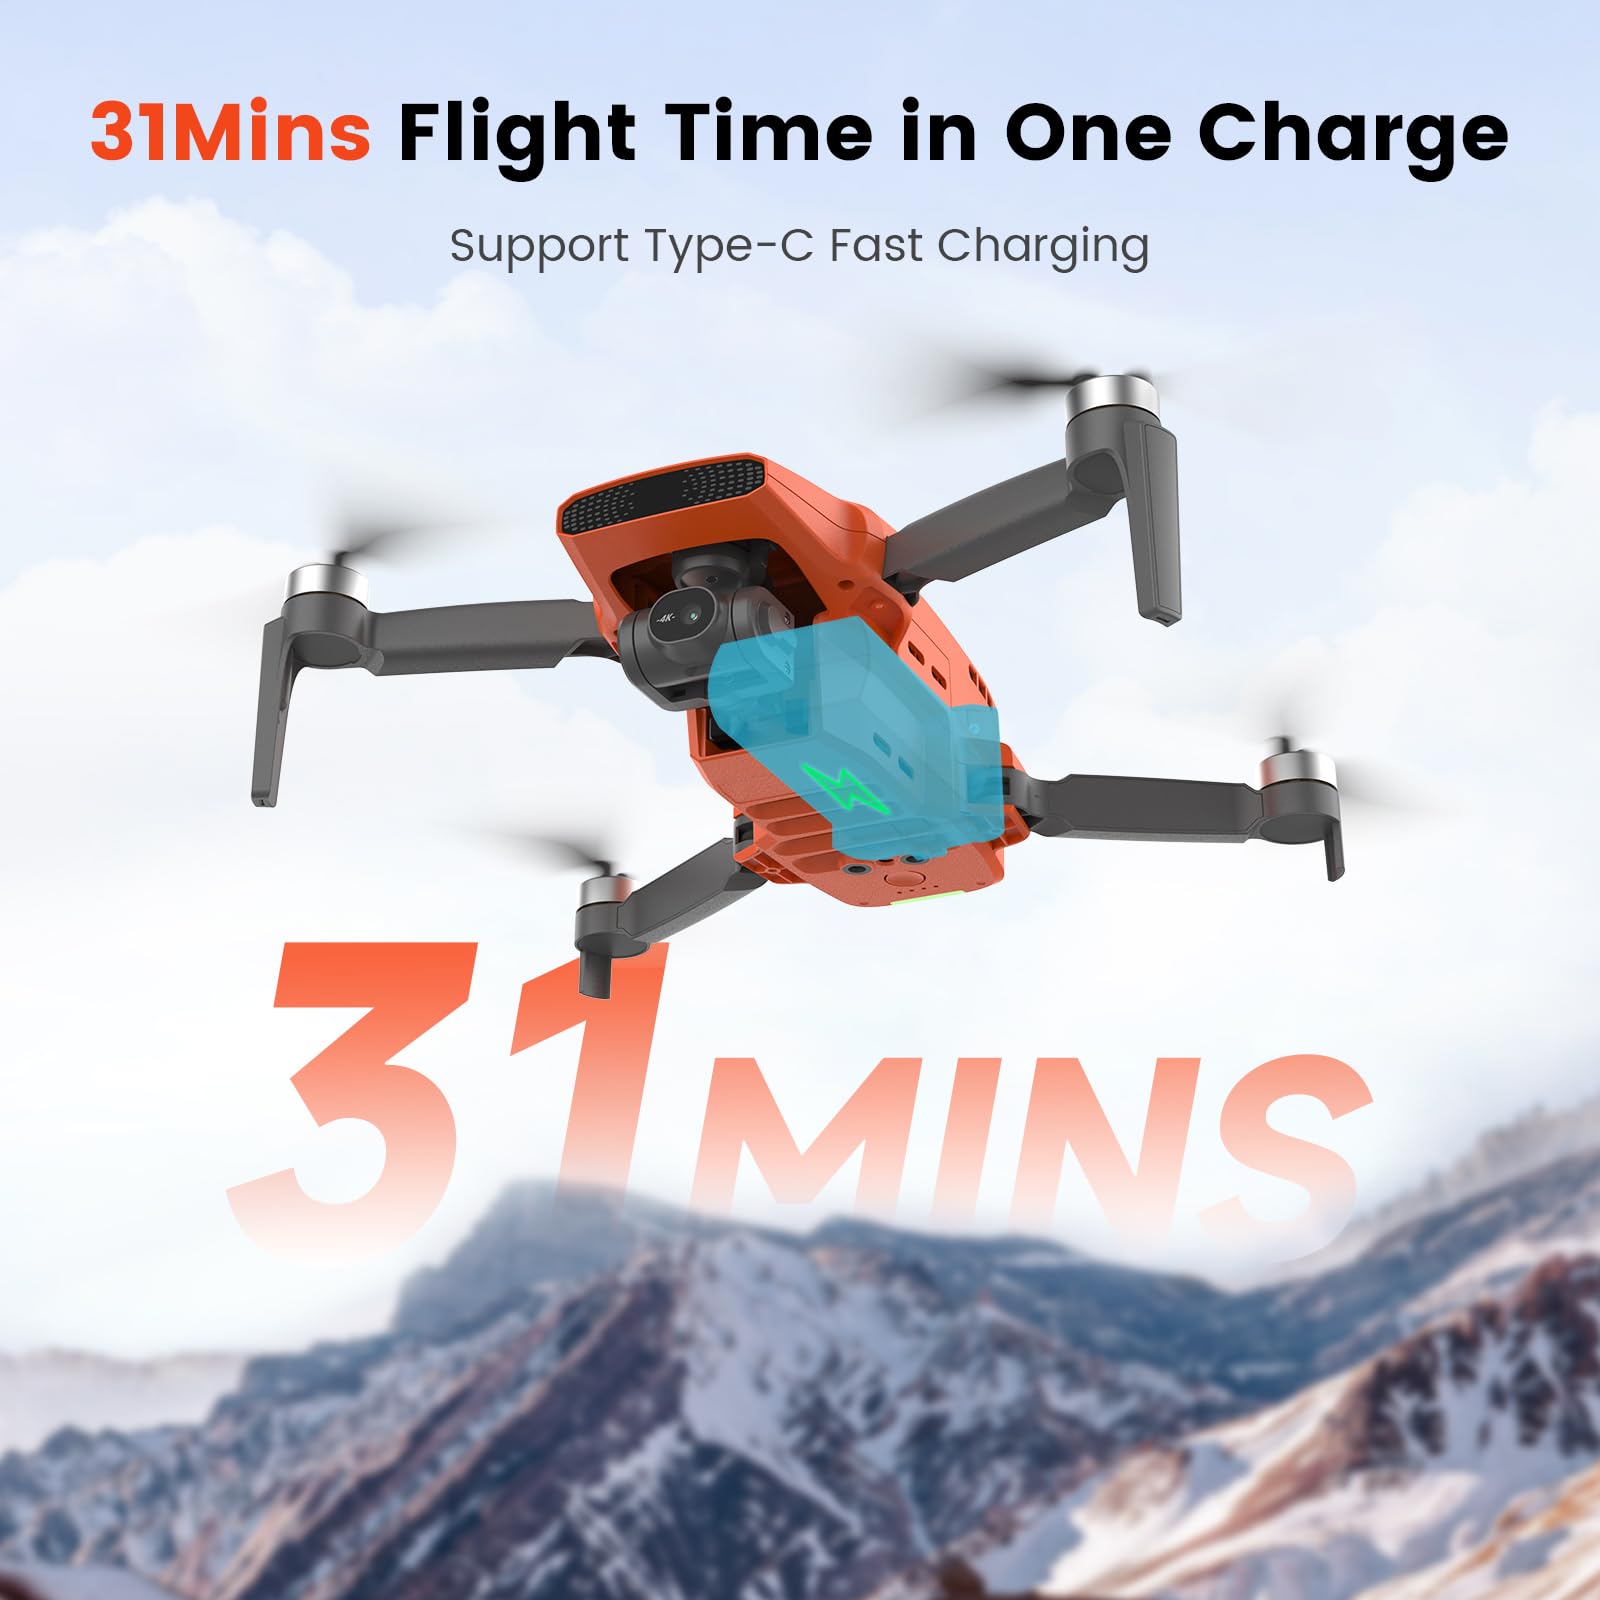 FIMI X8 MINI V2 Drone with Camera 4K, 3-Axis Gimbal, Under 249g, 9KM Video Transmission, 62 Mins Flight Time, Auto Return to Home, GPS Smart Tracking, Mini Drone for Adults Beginners with Carrying Bag